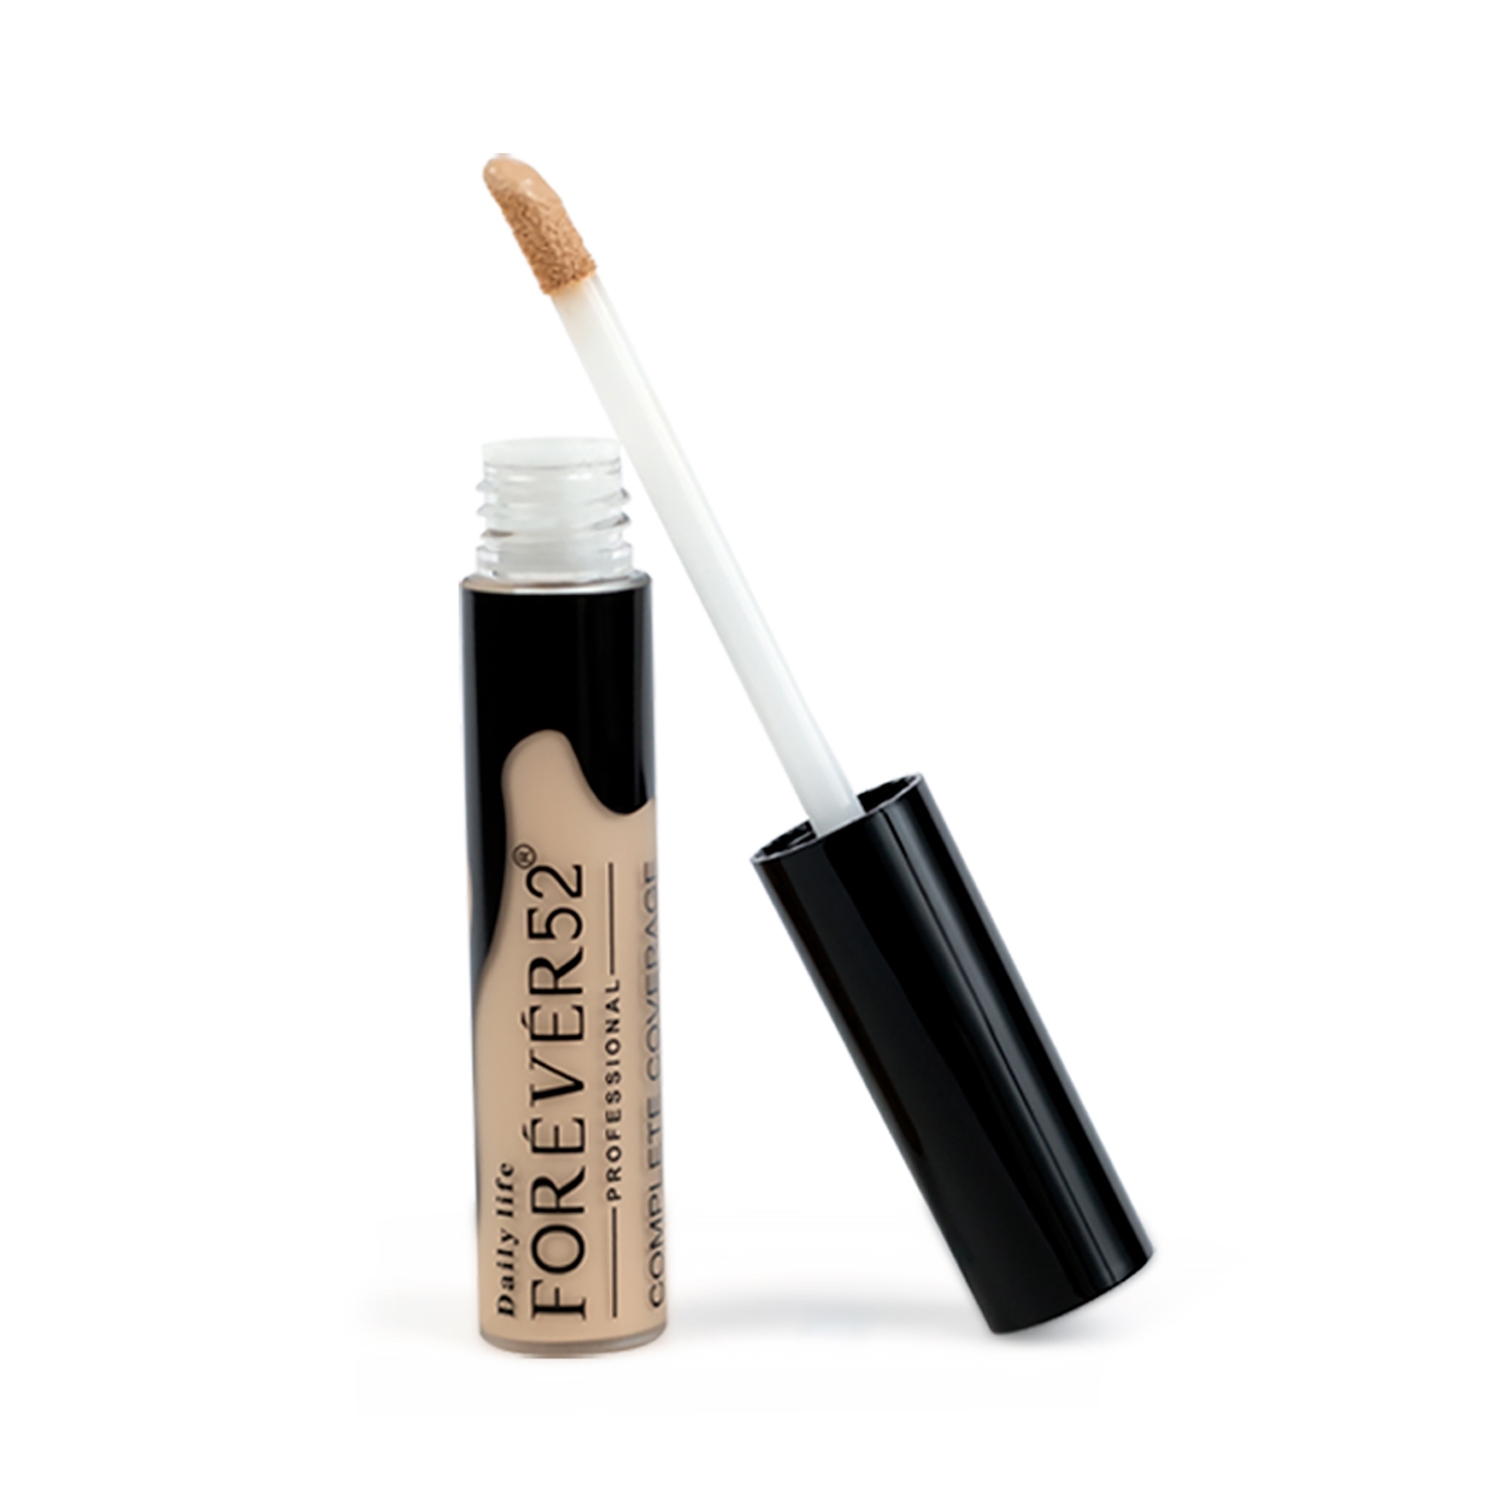 Daily Life Forever52 | Daily Life Forever52 Complete Coverage Concealer COV004 - Latte (10g)